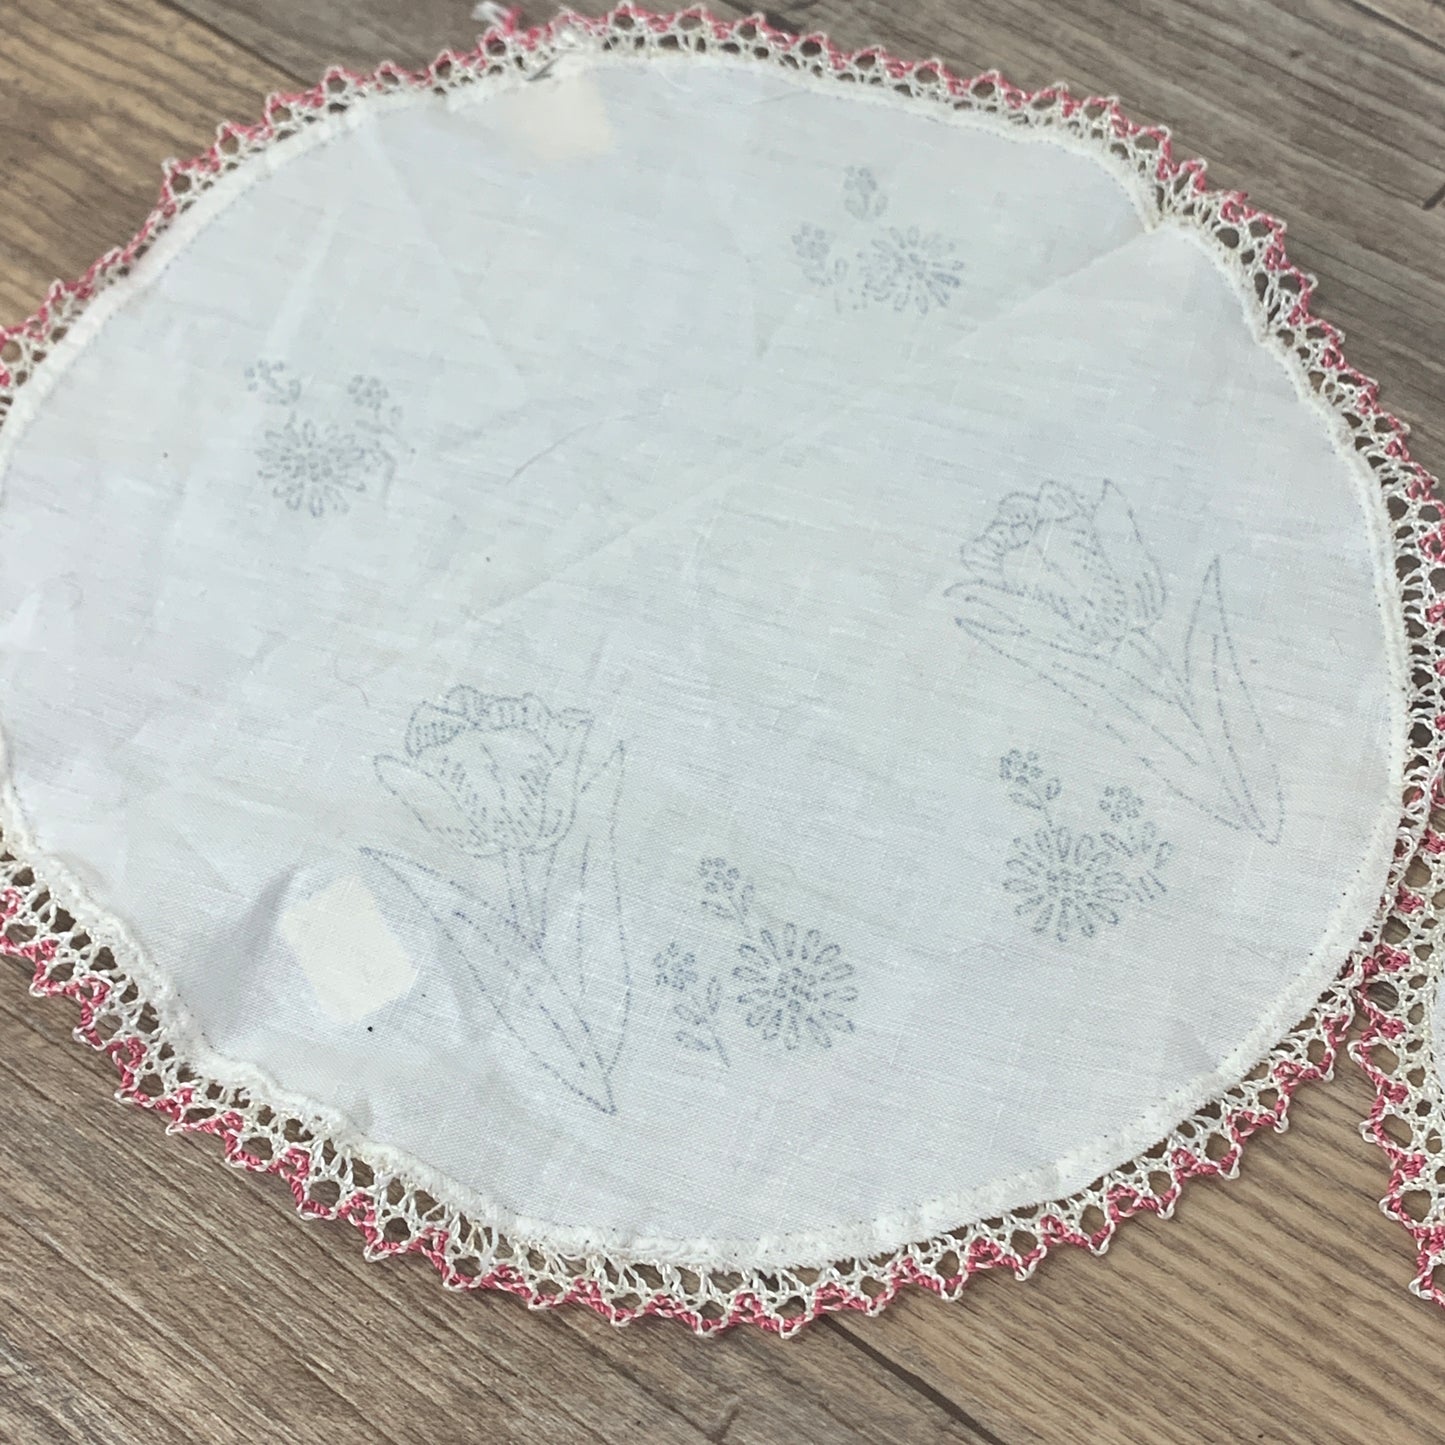 Vintage Doilies with Bobbin Lace DIY Embroidery Blanks, NOS Table Scarf with Iron on Transfers